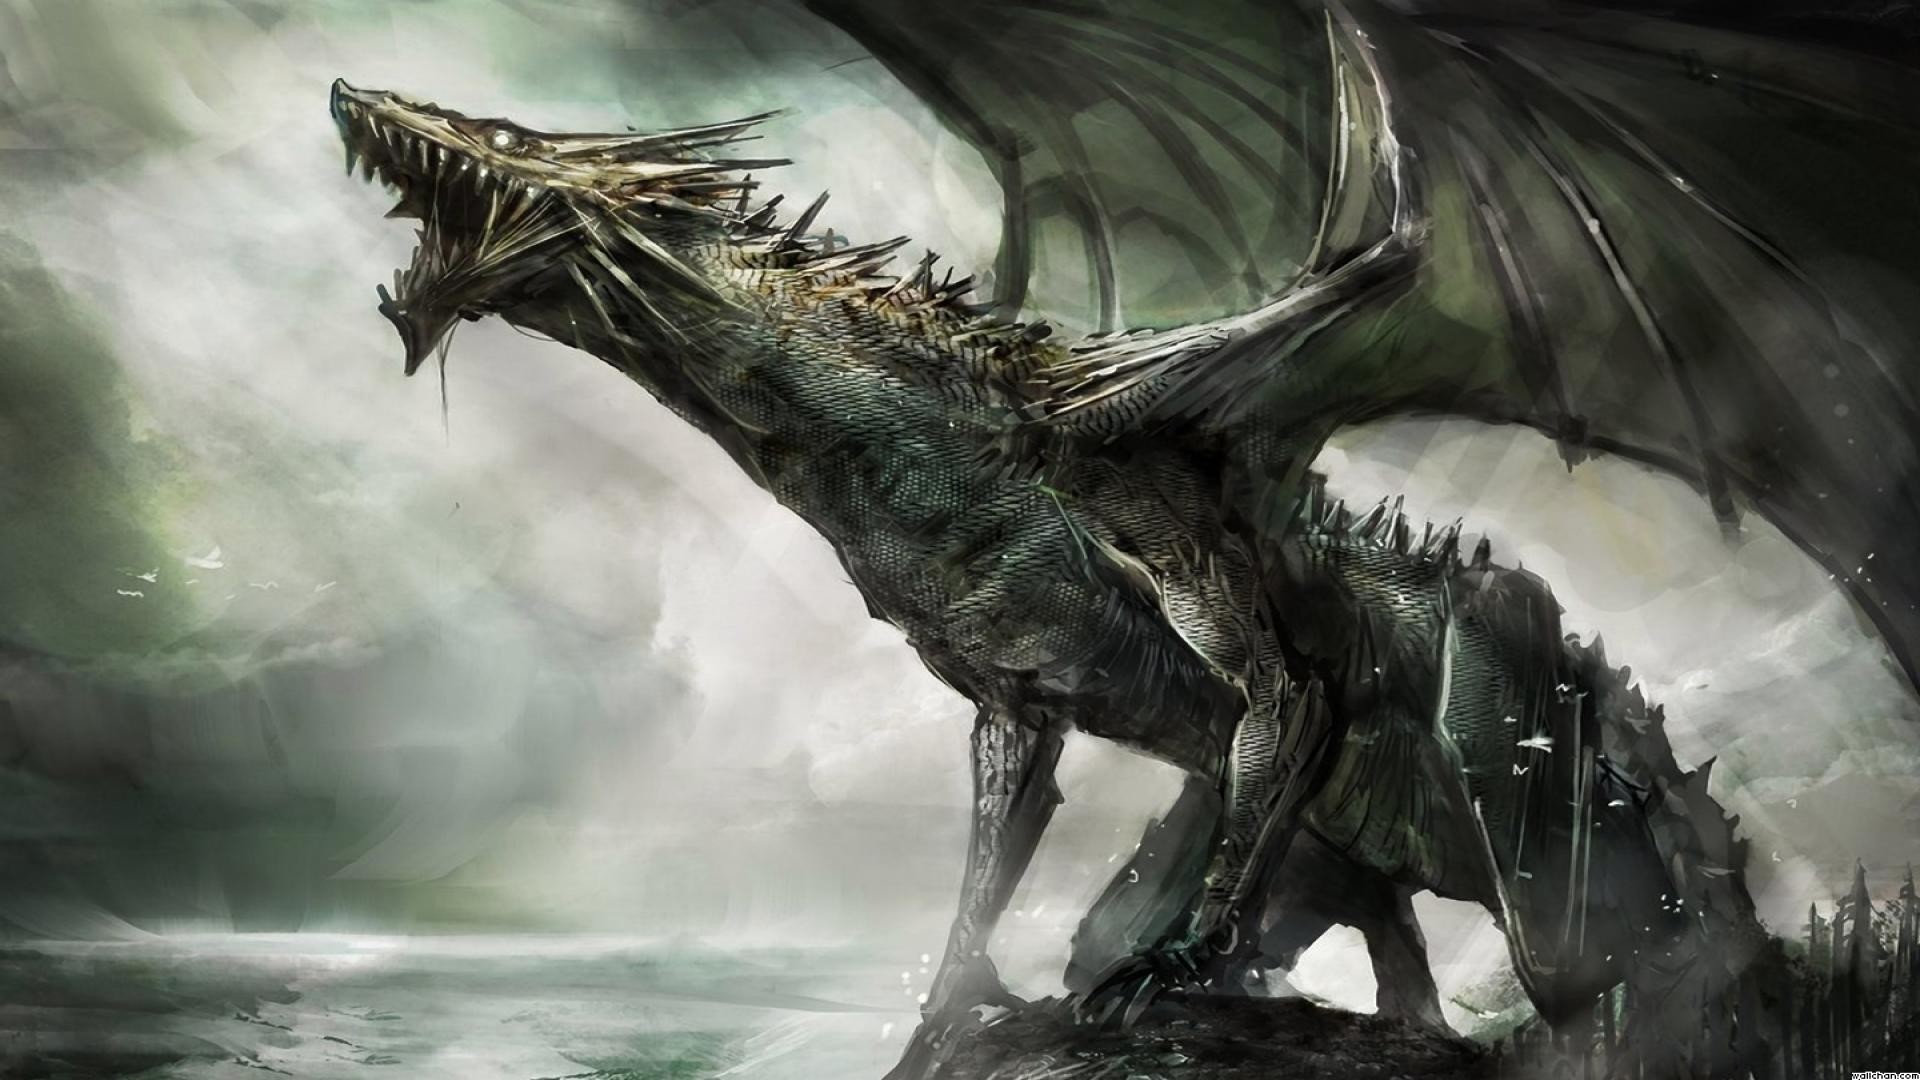 1920x1080  images-for-gt-cool-dragons-wallpaper-hd-awesome-